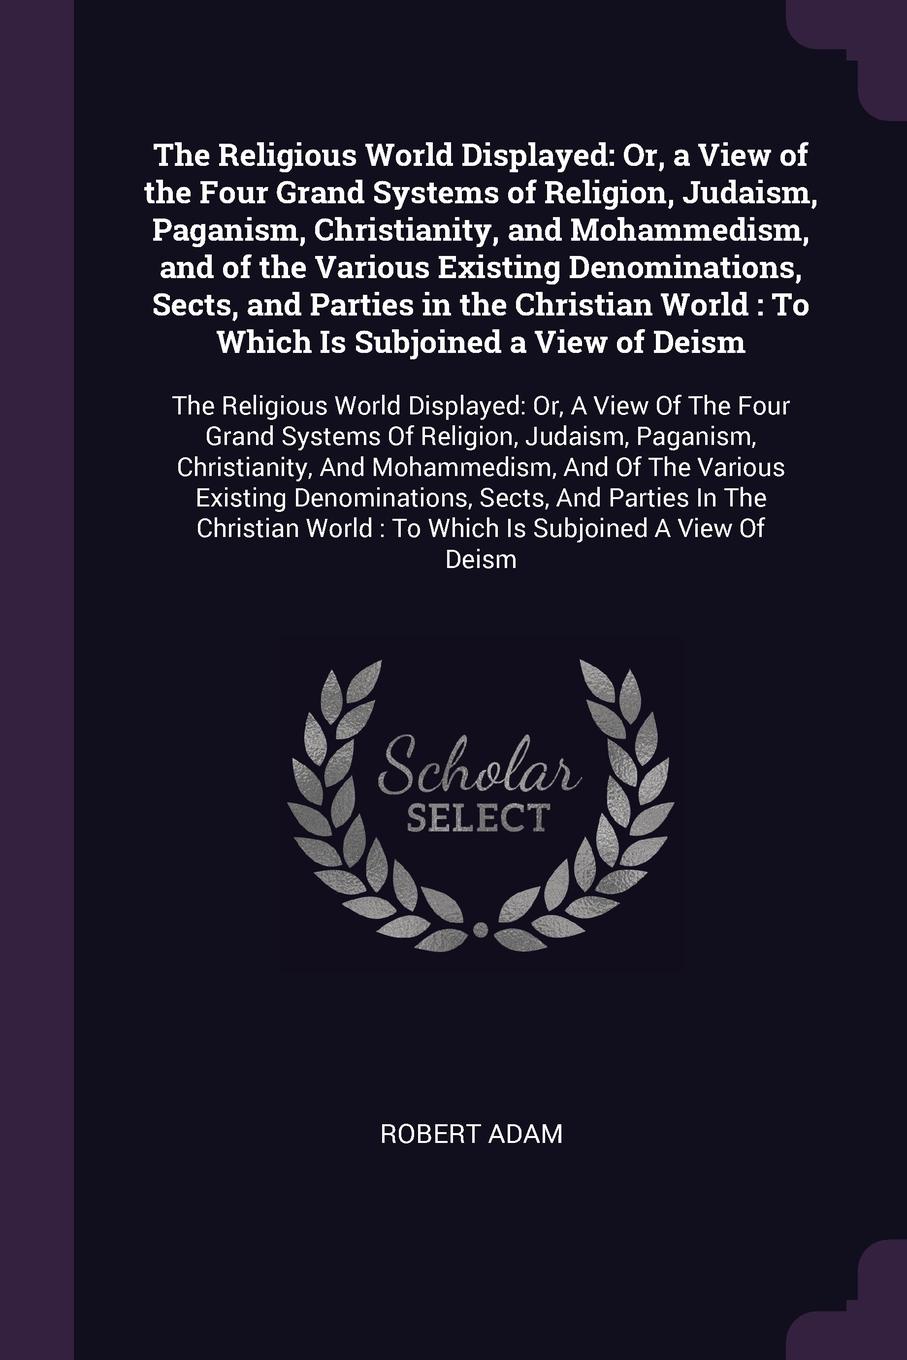 The Religious World Displayed. Or, a View of the Four Grand Systems of Religion, Judaism, Paganism, Christianity, and Mohammedism, and of the Various Existing Denominations, Sects, and Parties in the Christian World : To Which Is Subjoined a View ...